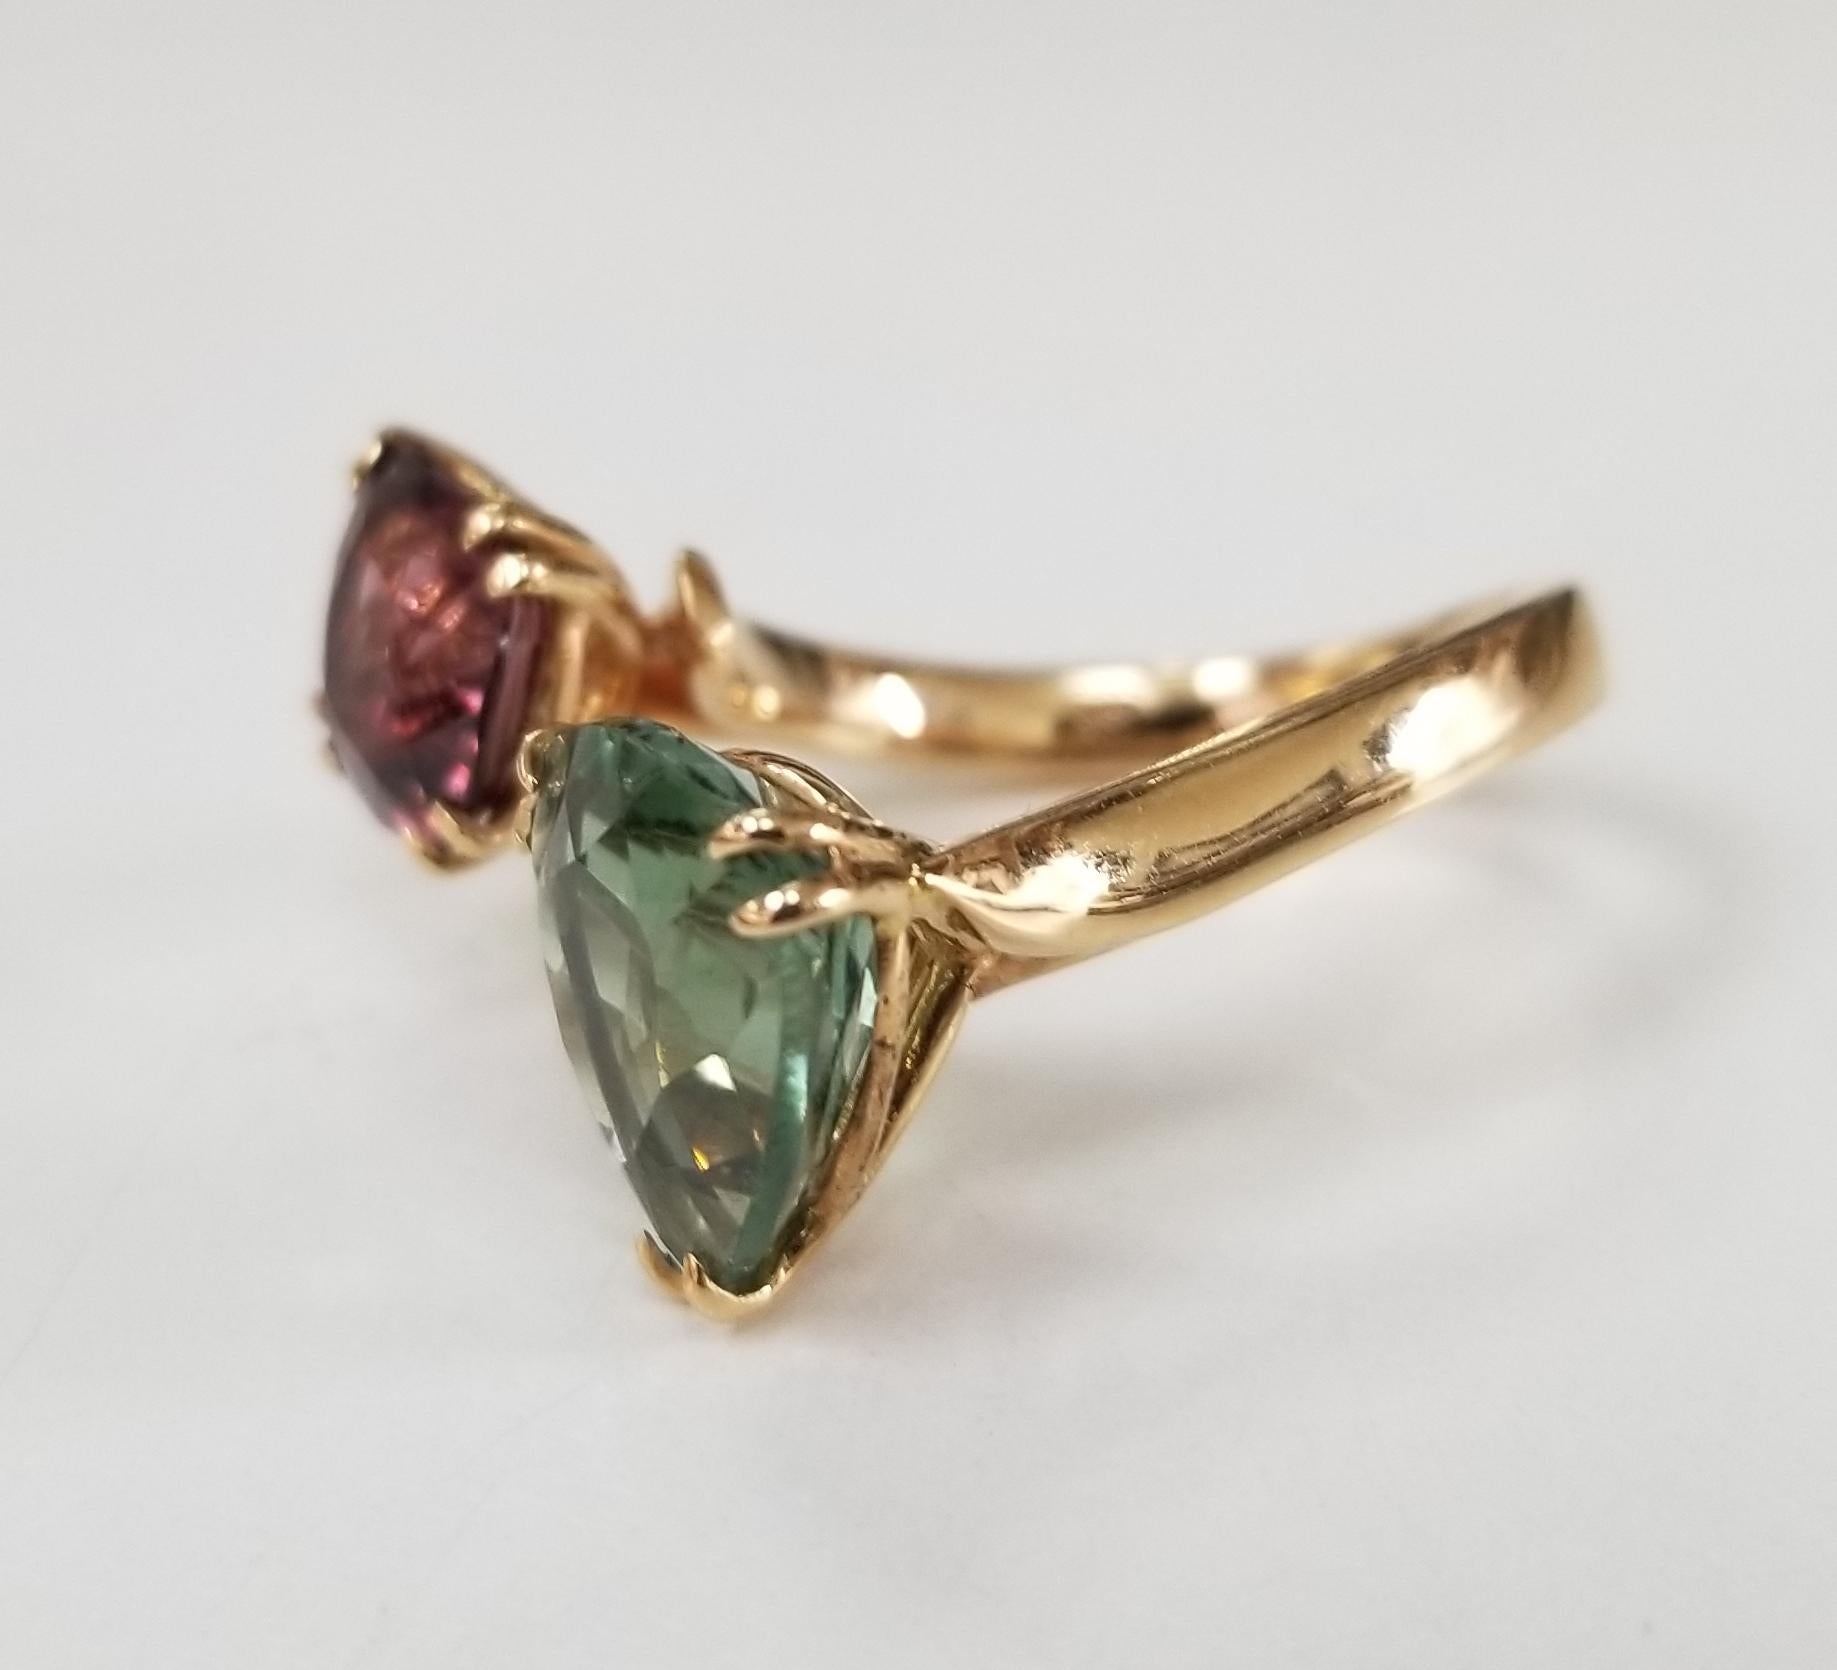 Pink Spinel  1.60cts. and Green Tourmaline 3.60cts. spaced ring set in 18 karat rose gold, both stones are of gem quality, designed by 